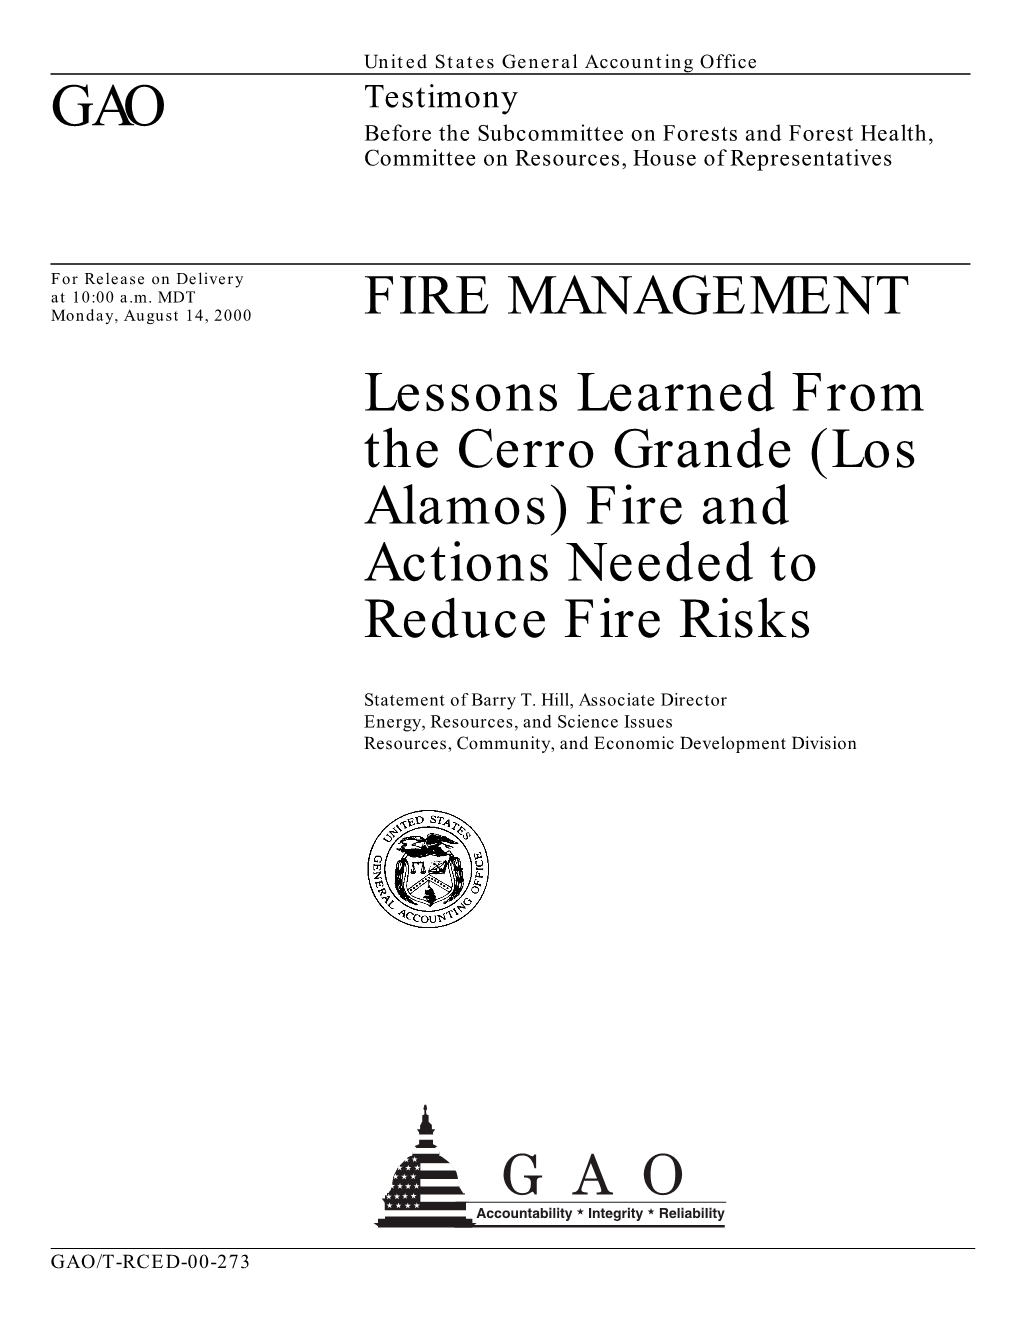 FIRE MANAGEMENT Lessons Learned from the Cerro Grande (Los Alamos) Fire and Actions Needed to Reduce Fire Risks